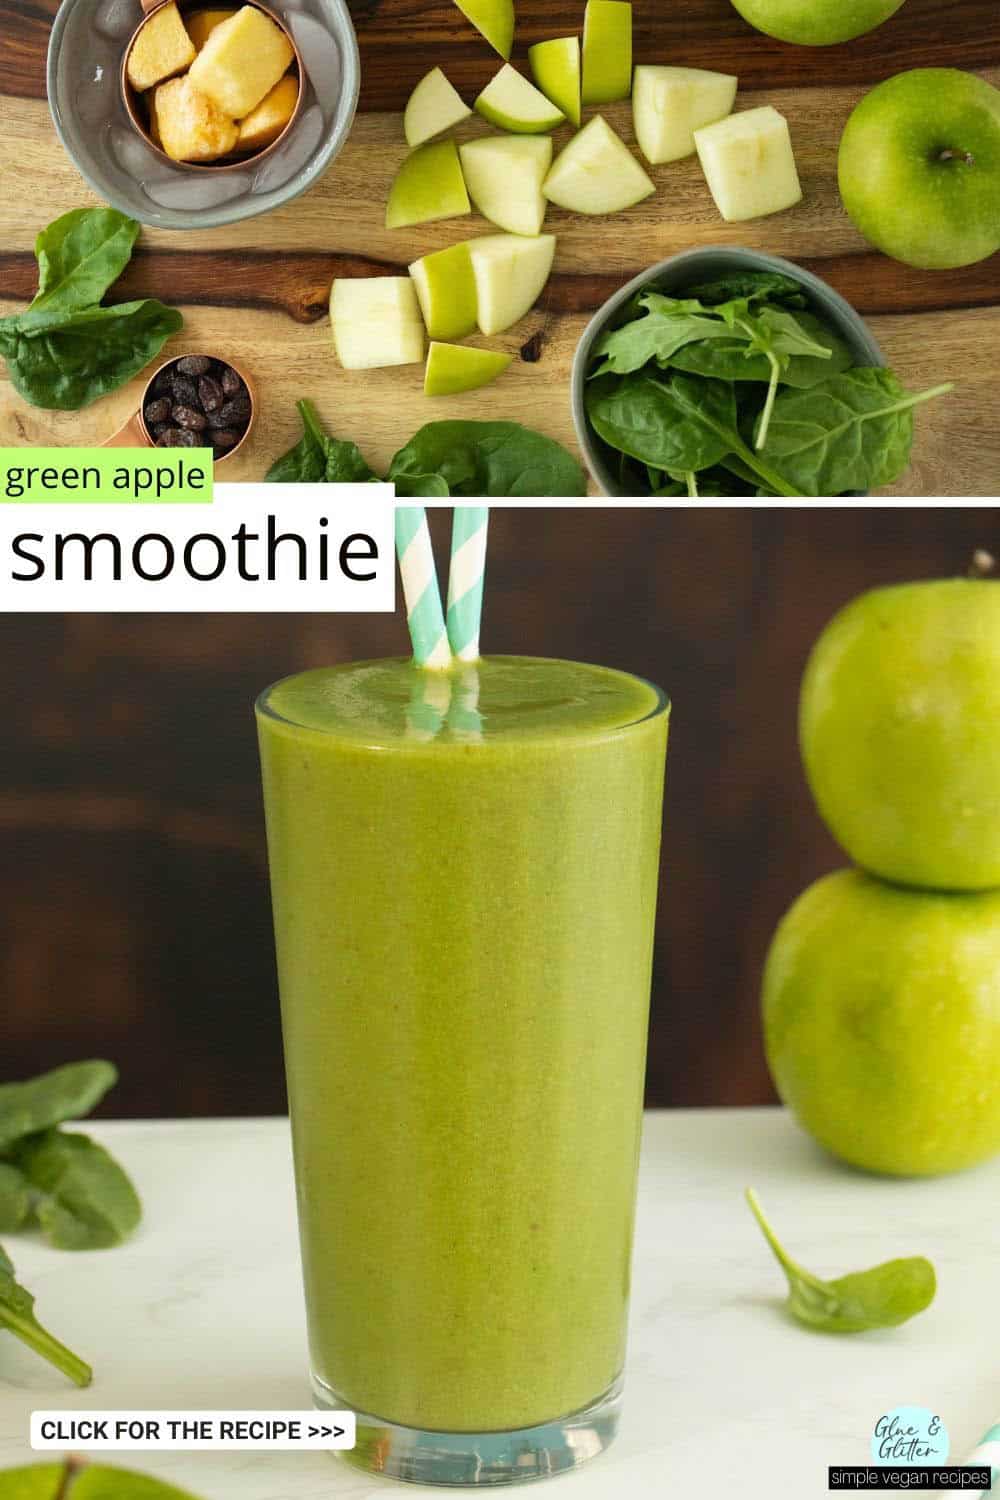 image collage showing the green apple smoothie ingredients and the blended smoothie